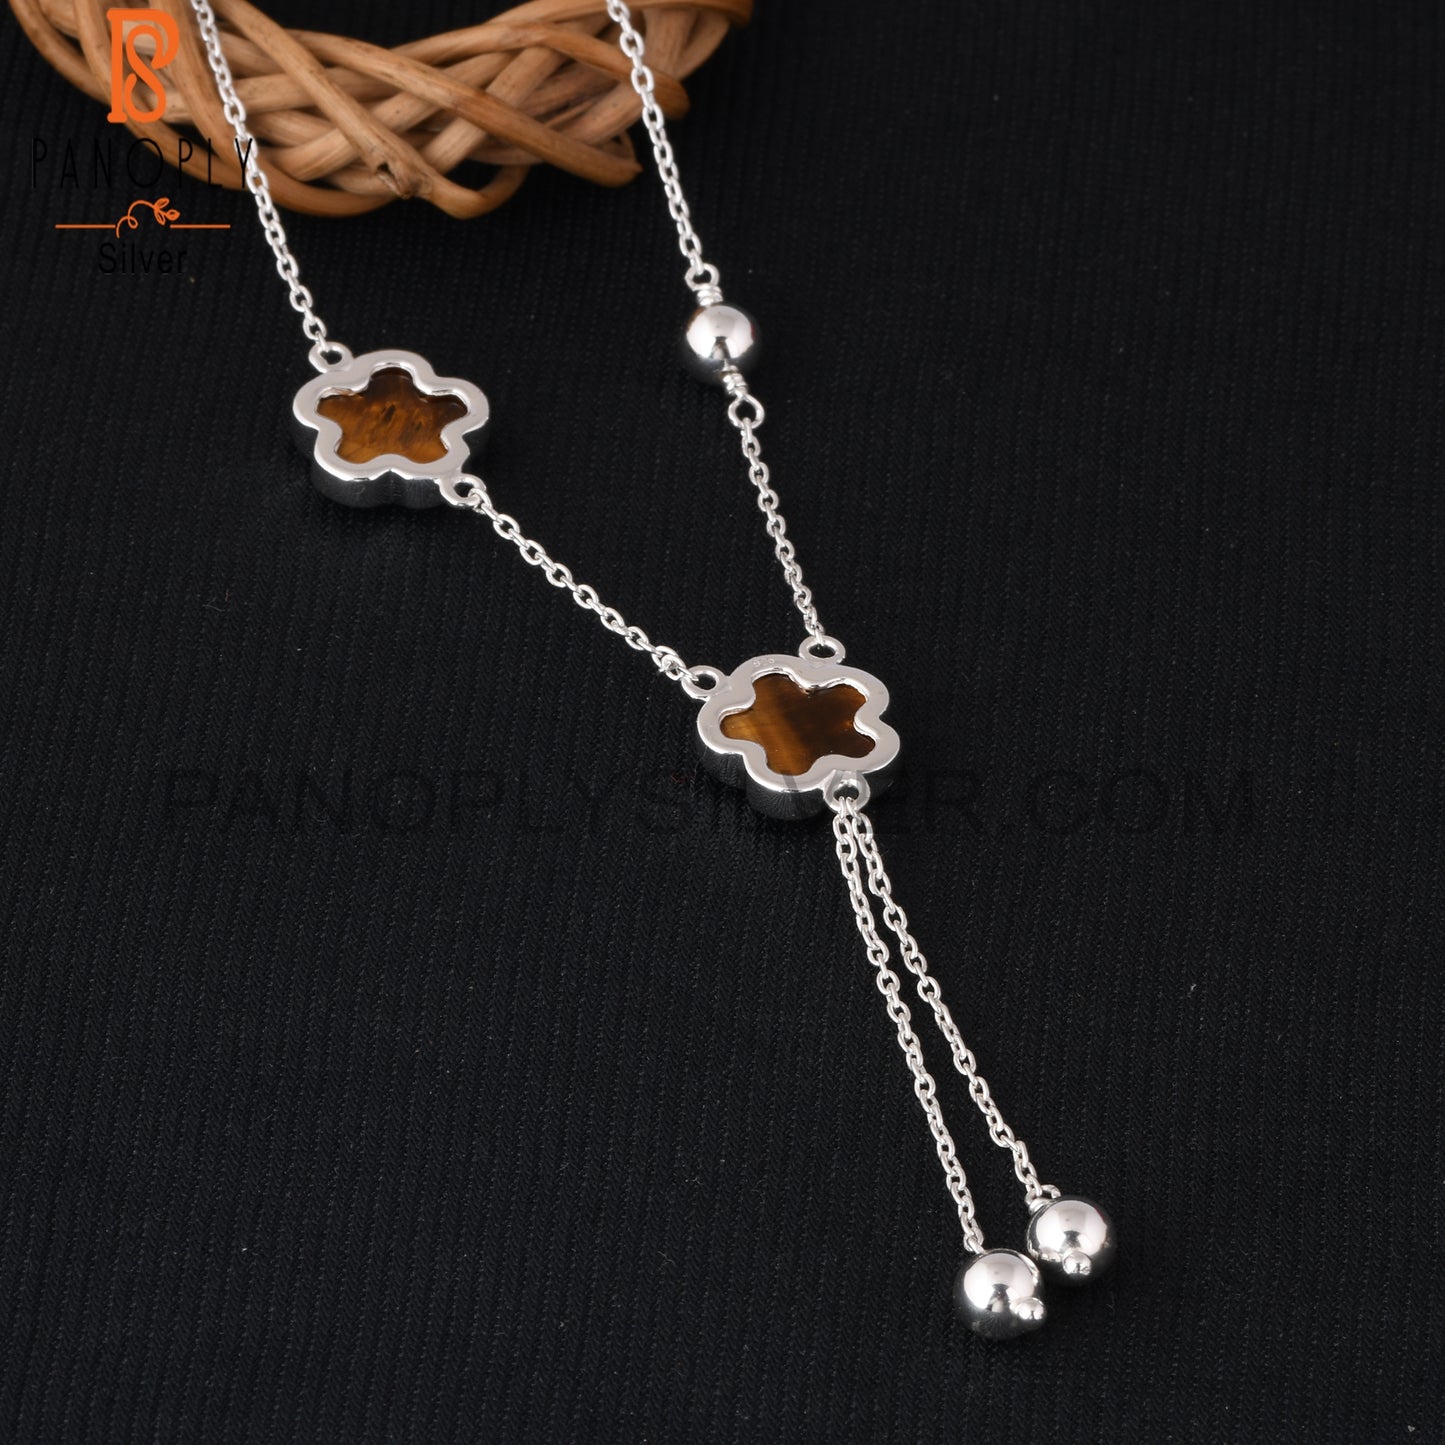 Tiger Eye Yellow Sunflower 925 Silver Beautiful Necklace